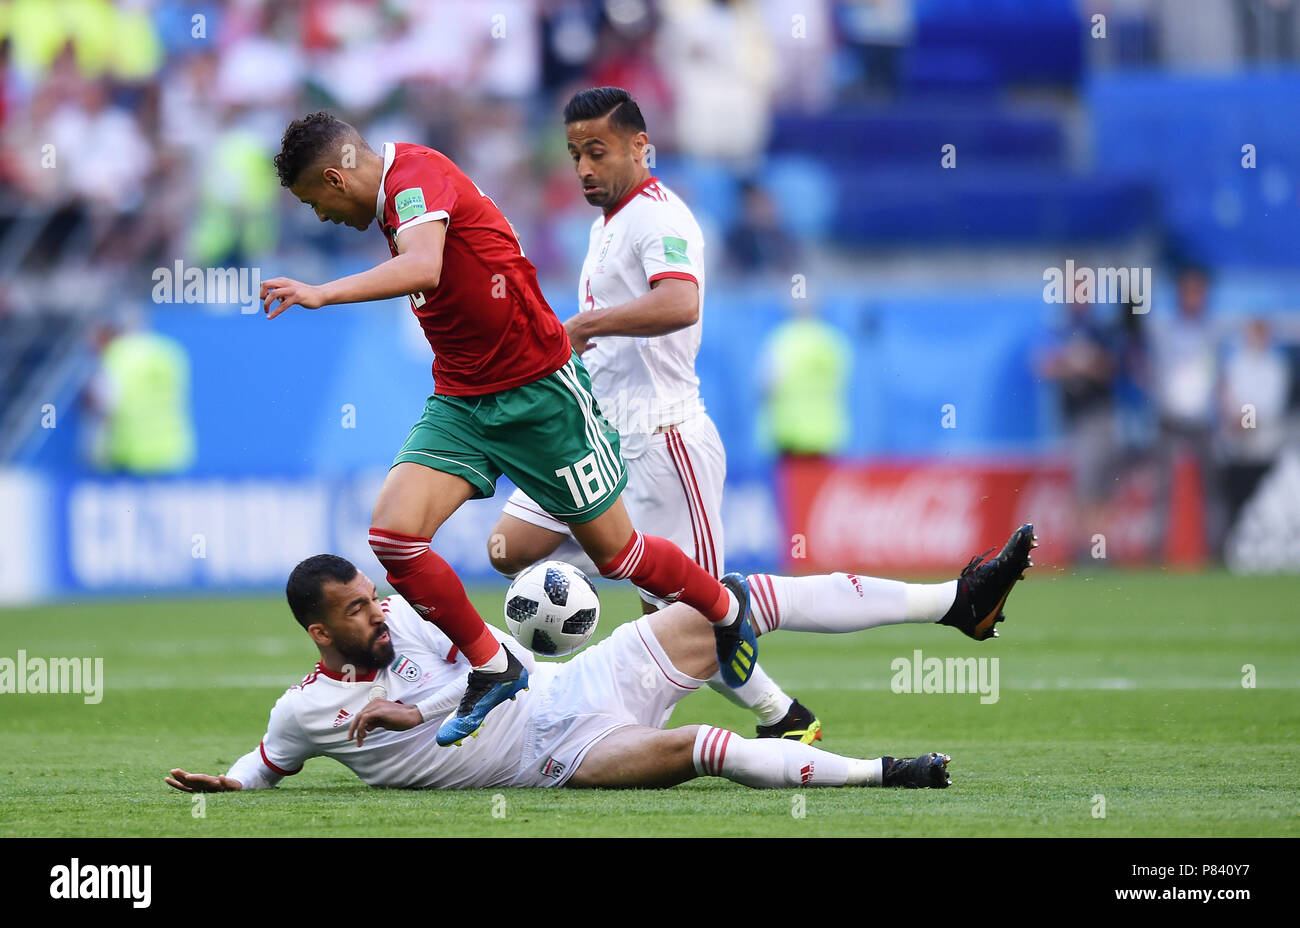 SAINT PETERSBURG, RUSSIA - JUNE 15: Roozbeh Cheshmi of IR Iran competes with Amine Harit of Morocco during the 2018 FIFA World Cup Russia group B match between Morocco and Iran at Saint Petersburg Stadium on June 15, 2018 in Saint Petersburg, Russia. (Photo by Lukasz Laskowski/PressFocus/MB Media) Stock Photo